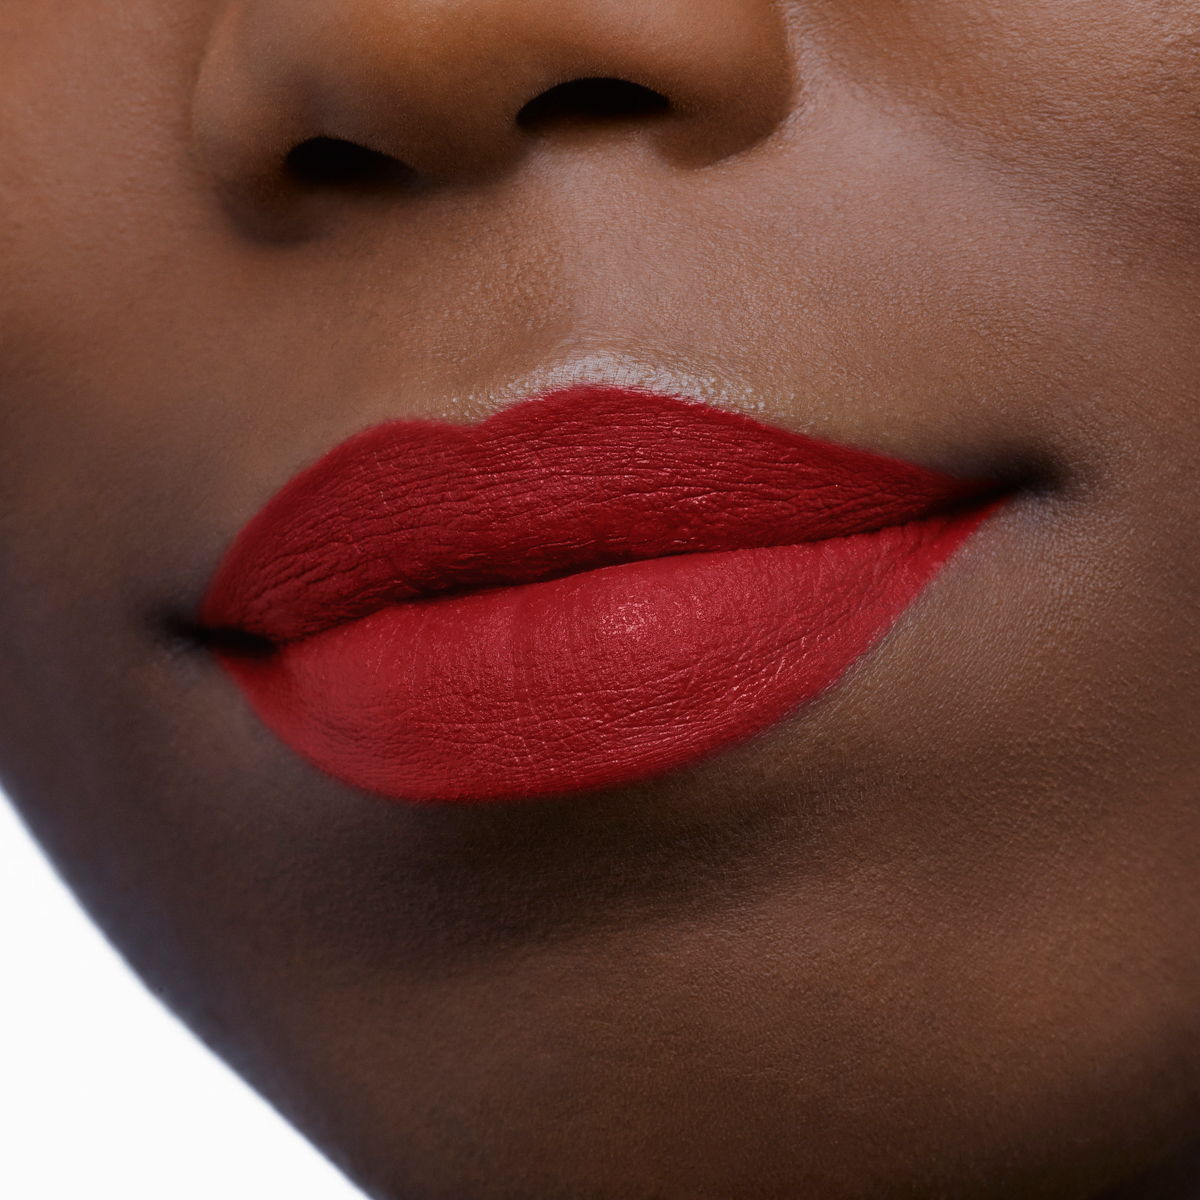 Red soles for your lips: the Louboutin Rouge Velvet Matte lipstick